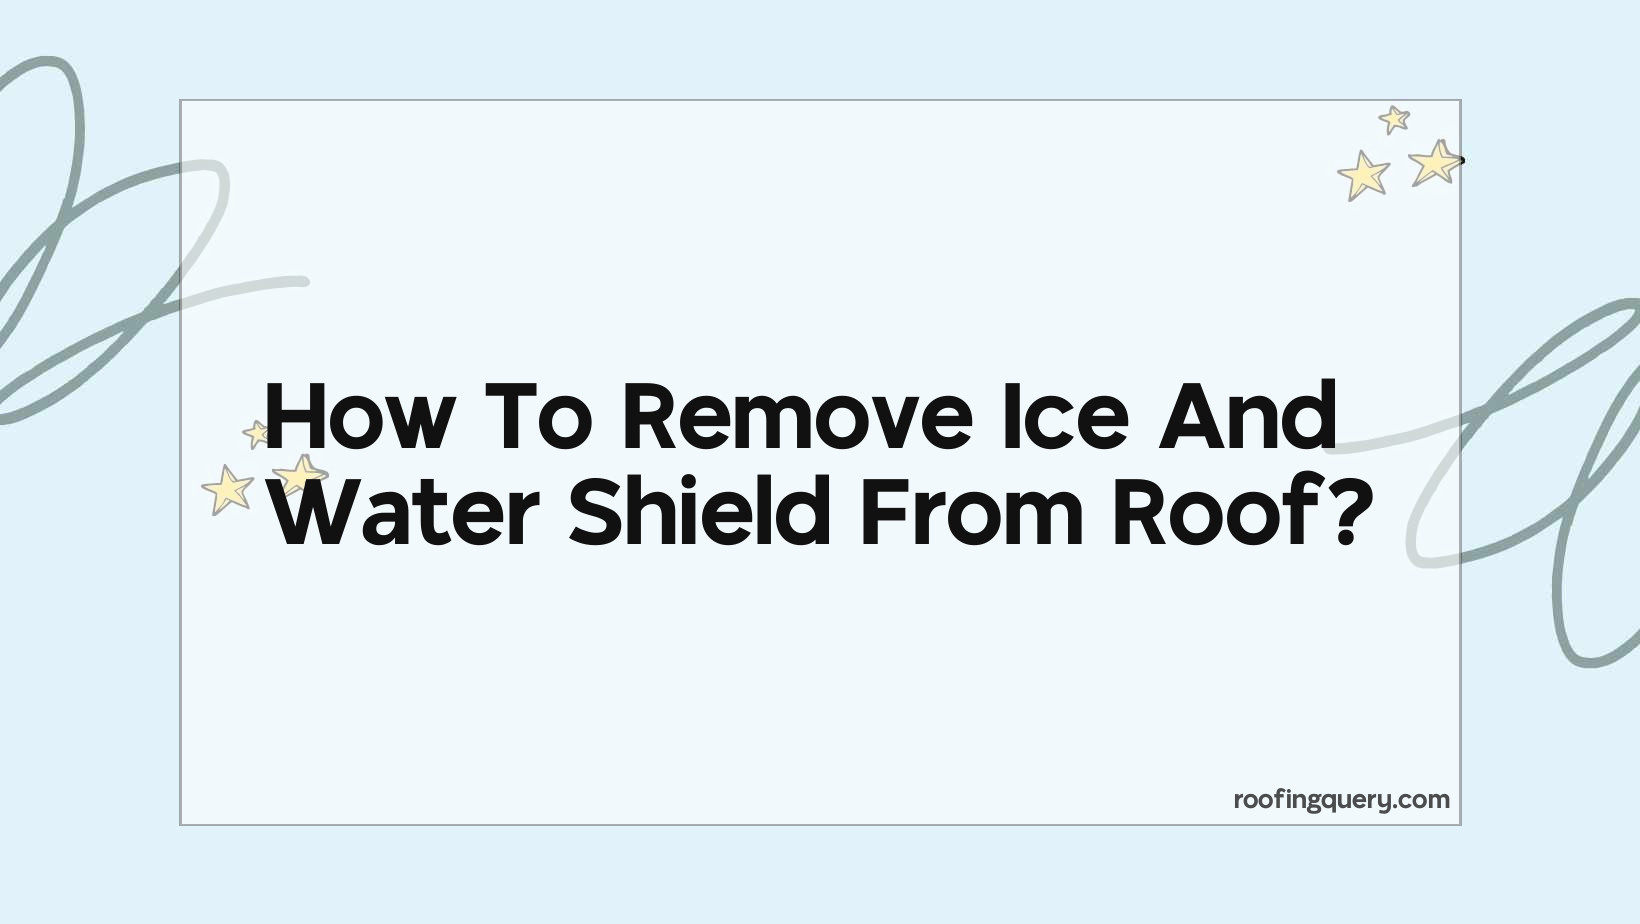 How To Remove Ice And Water Shield From Roof?